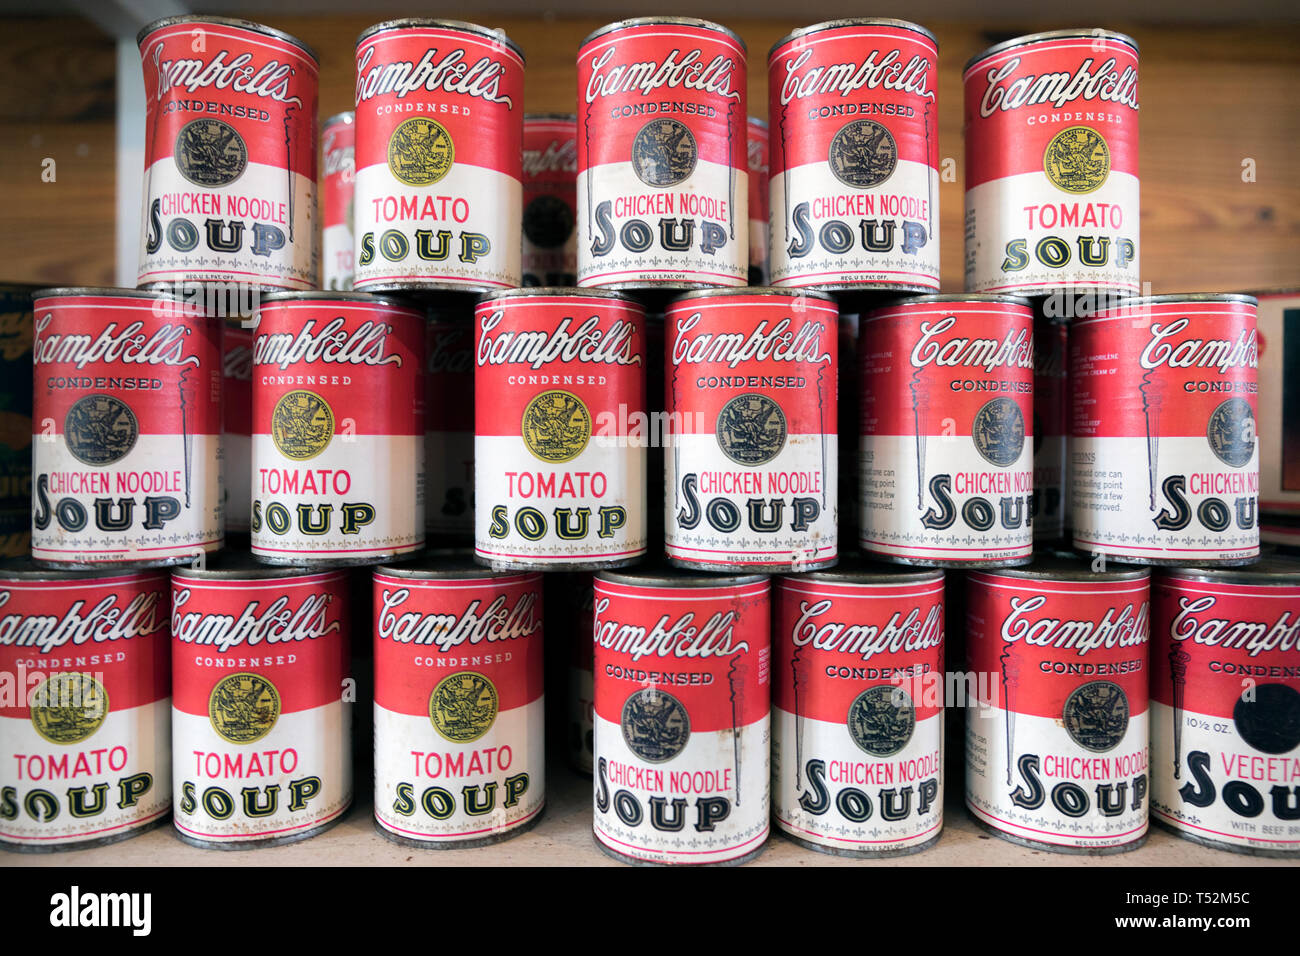 Campbell soup cans Stock Photo